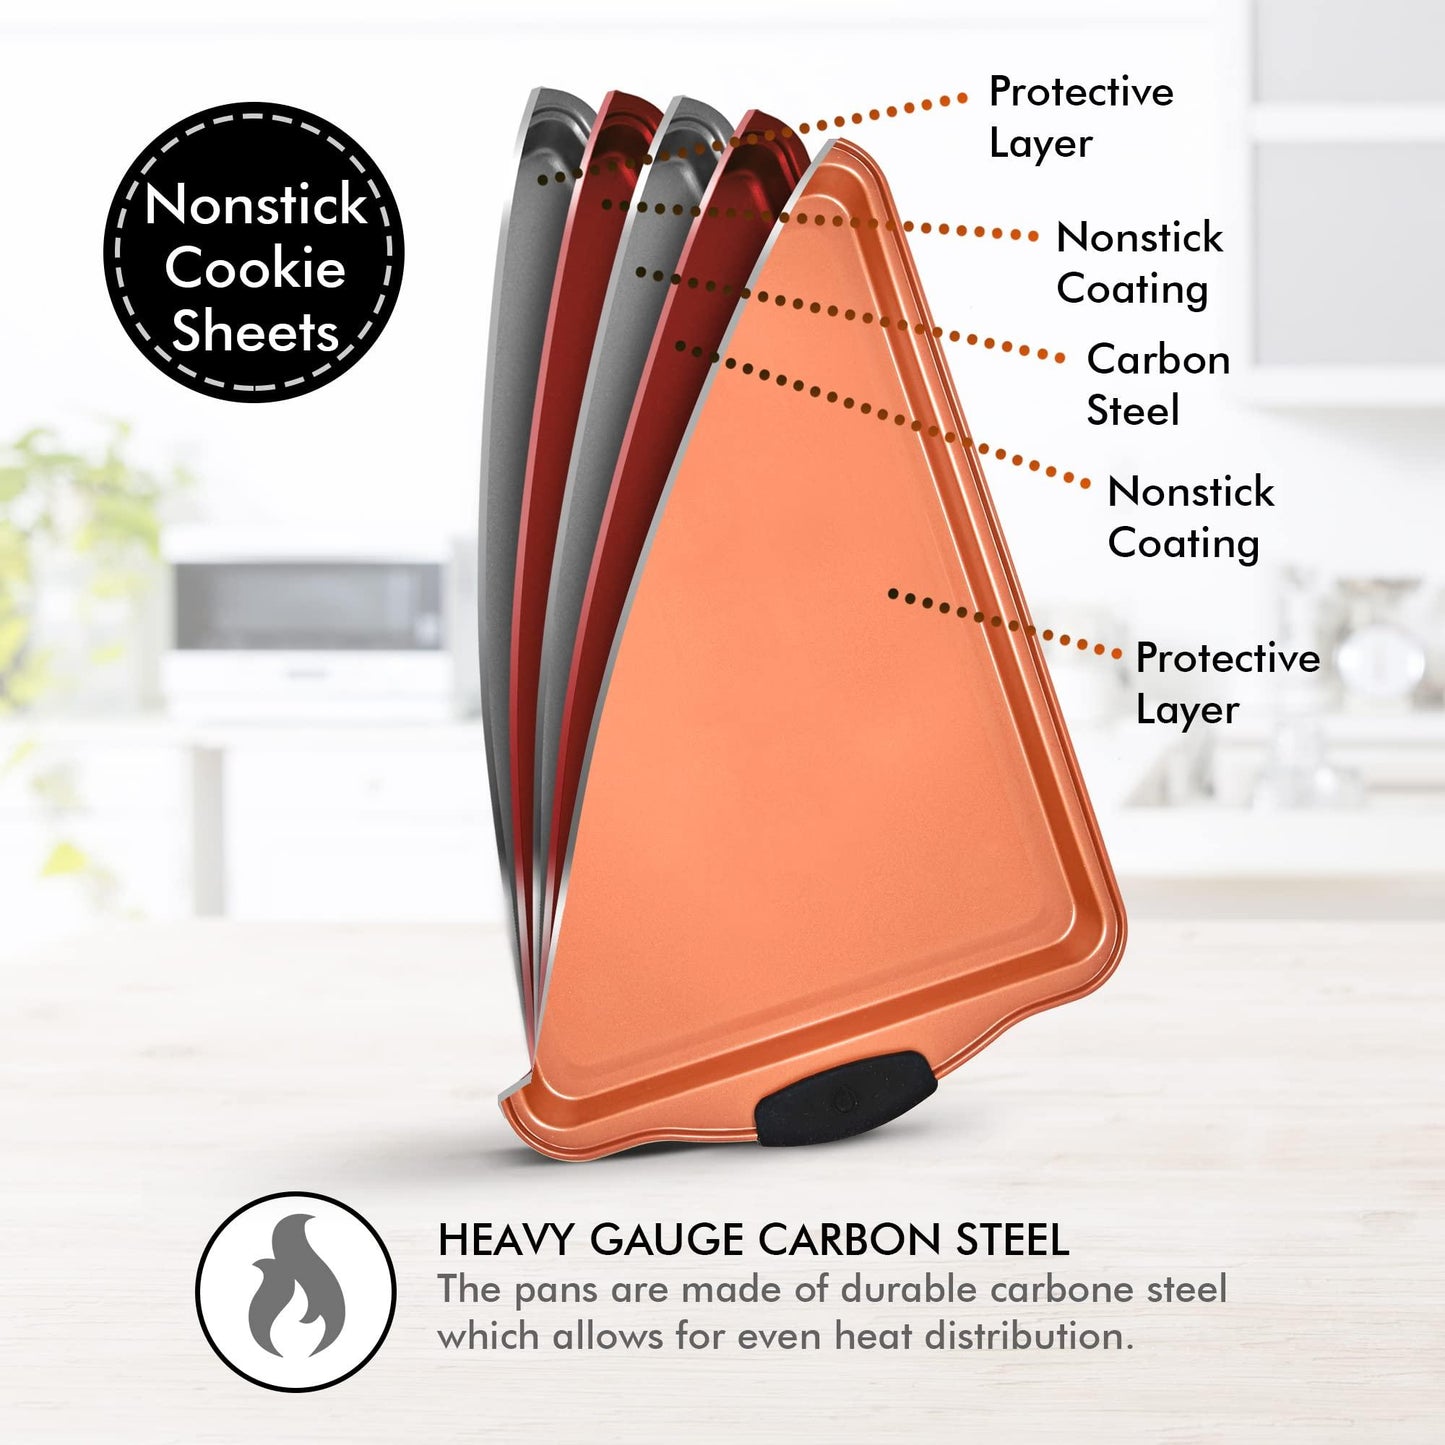 Perlli Baking Pan 10 Piece Set Nonstick Copper Steel Oven Bakeware Kitchen Set with Silicone Grips, Cookie Sheets, Round Cake Pans, 9x13 Pan with Lid, Loaf Pan, Deep Pan, Pizza Crisper, Muffin Pan - CookCave